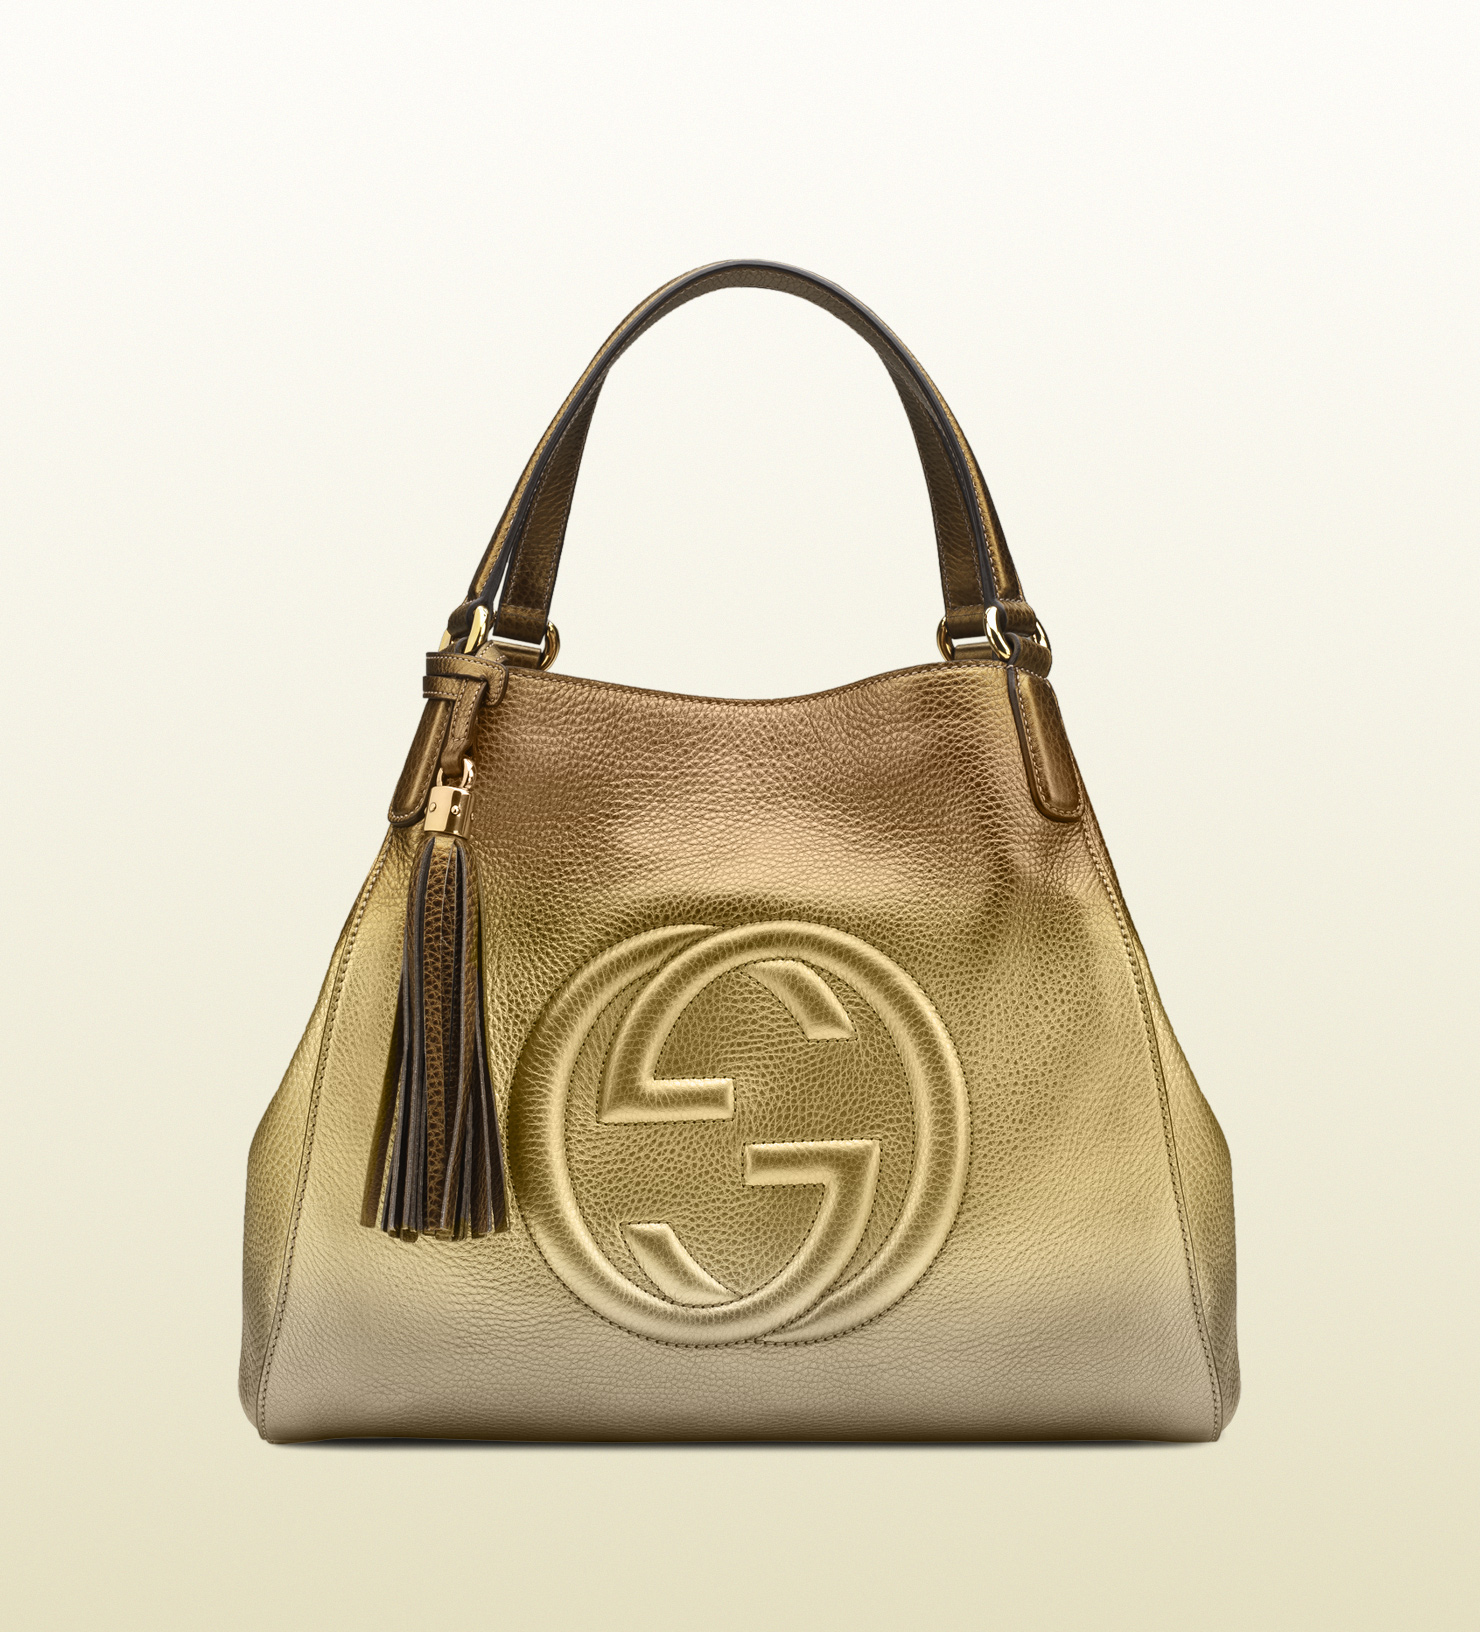 Gucci Soho Shaded Leather Shoulder Bag in Gold (beige) | Lyst